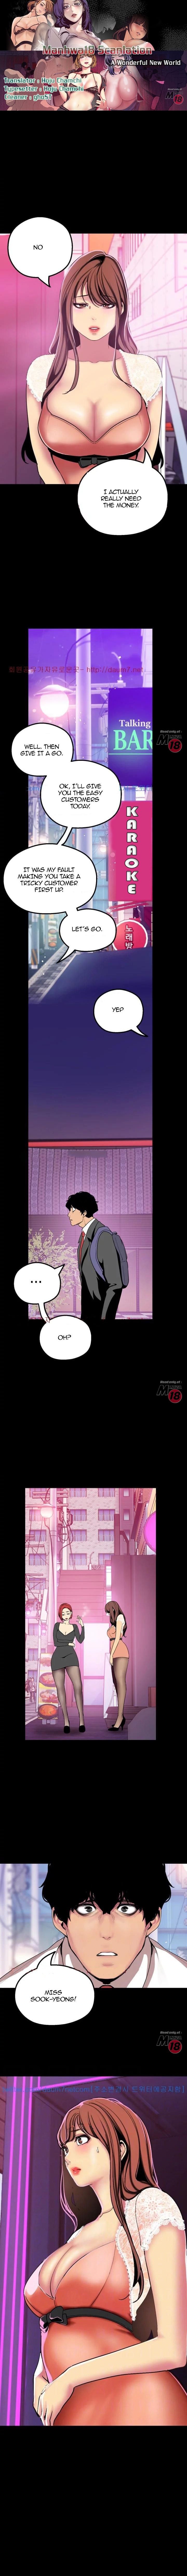 Panel Image 1 for chapter 22 of manhwa A Wonderful New World on read.oppai.stream